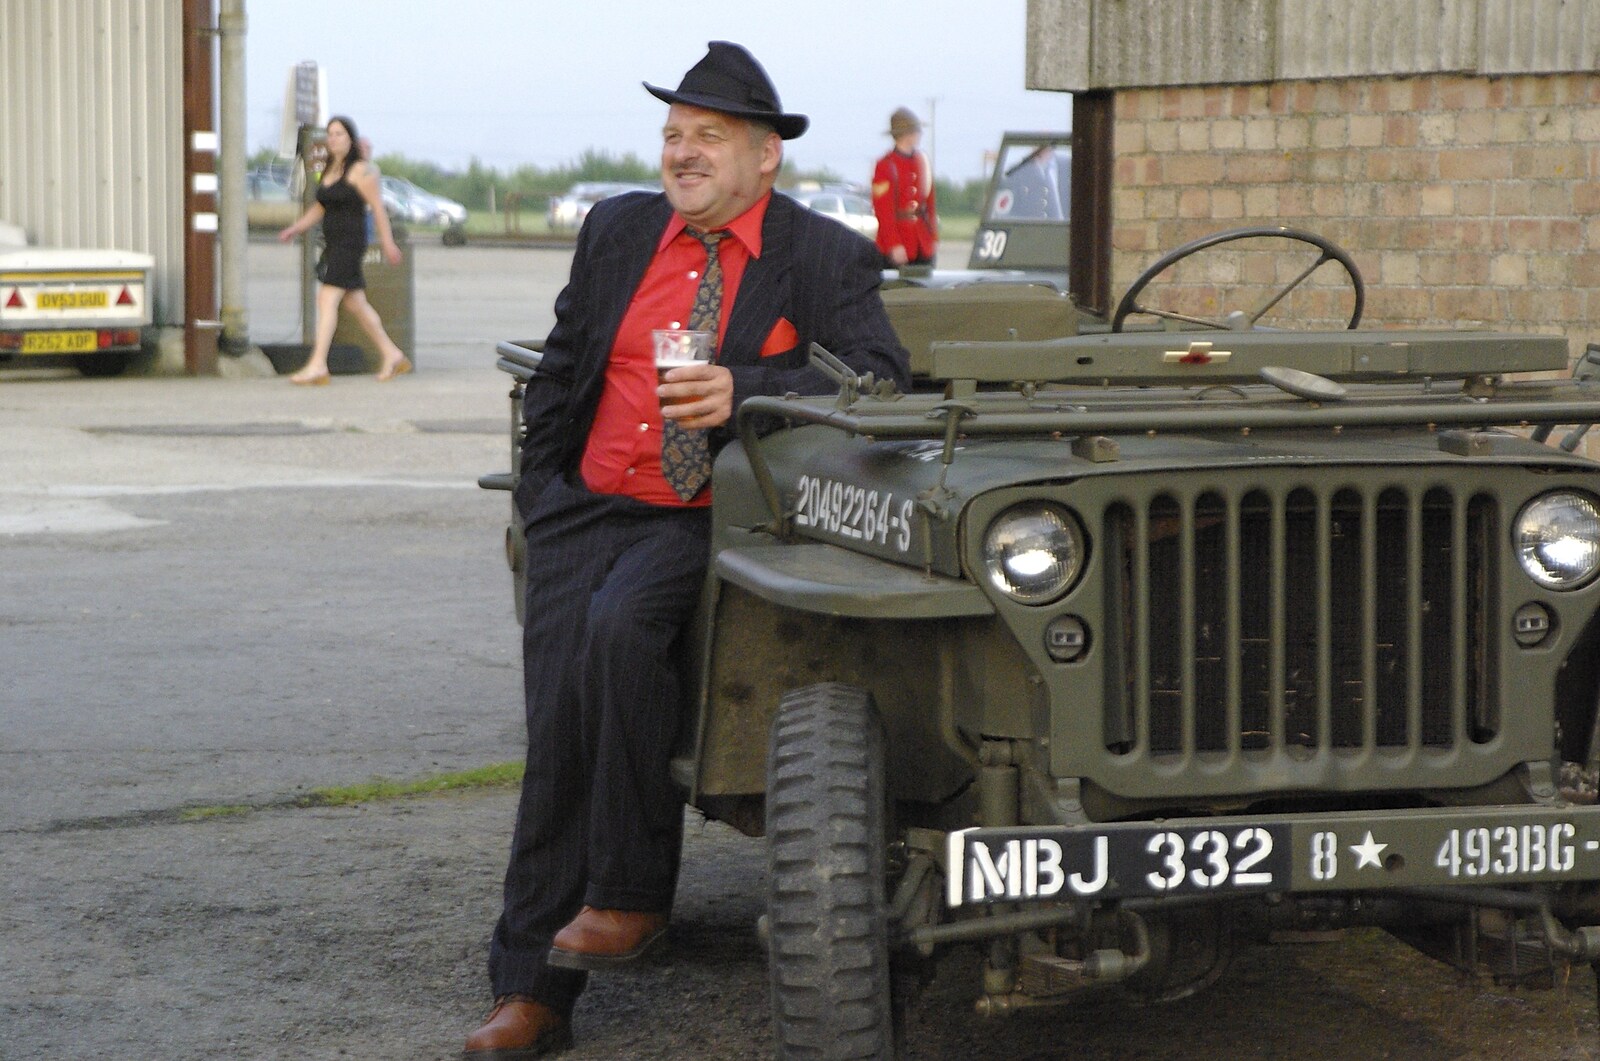 A 1940s Airfield Hangar Dance, Debach, Suffolk - 9th June 2007: A spiv surveys the scene, looking out for potential scams to perpetrate